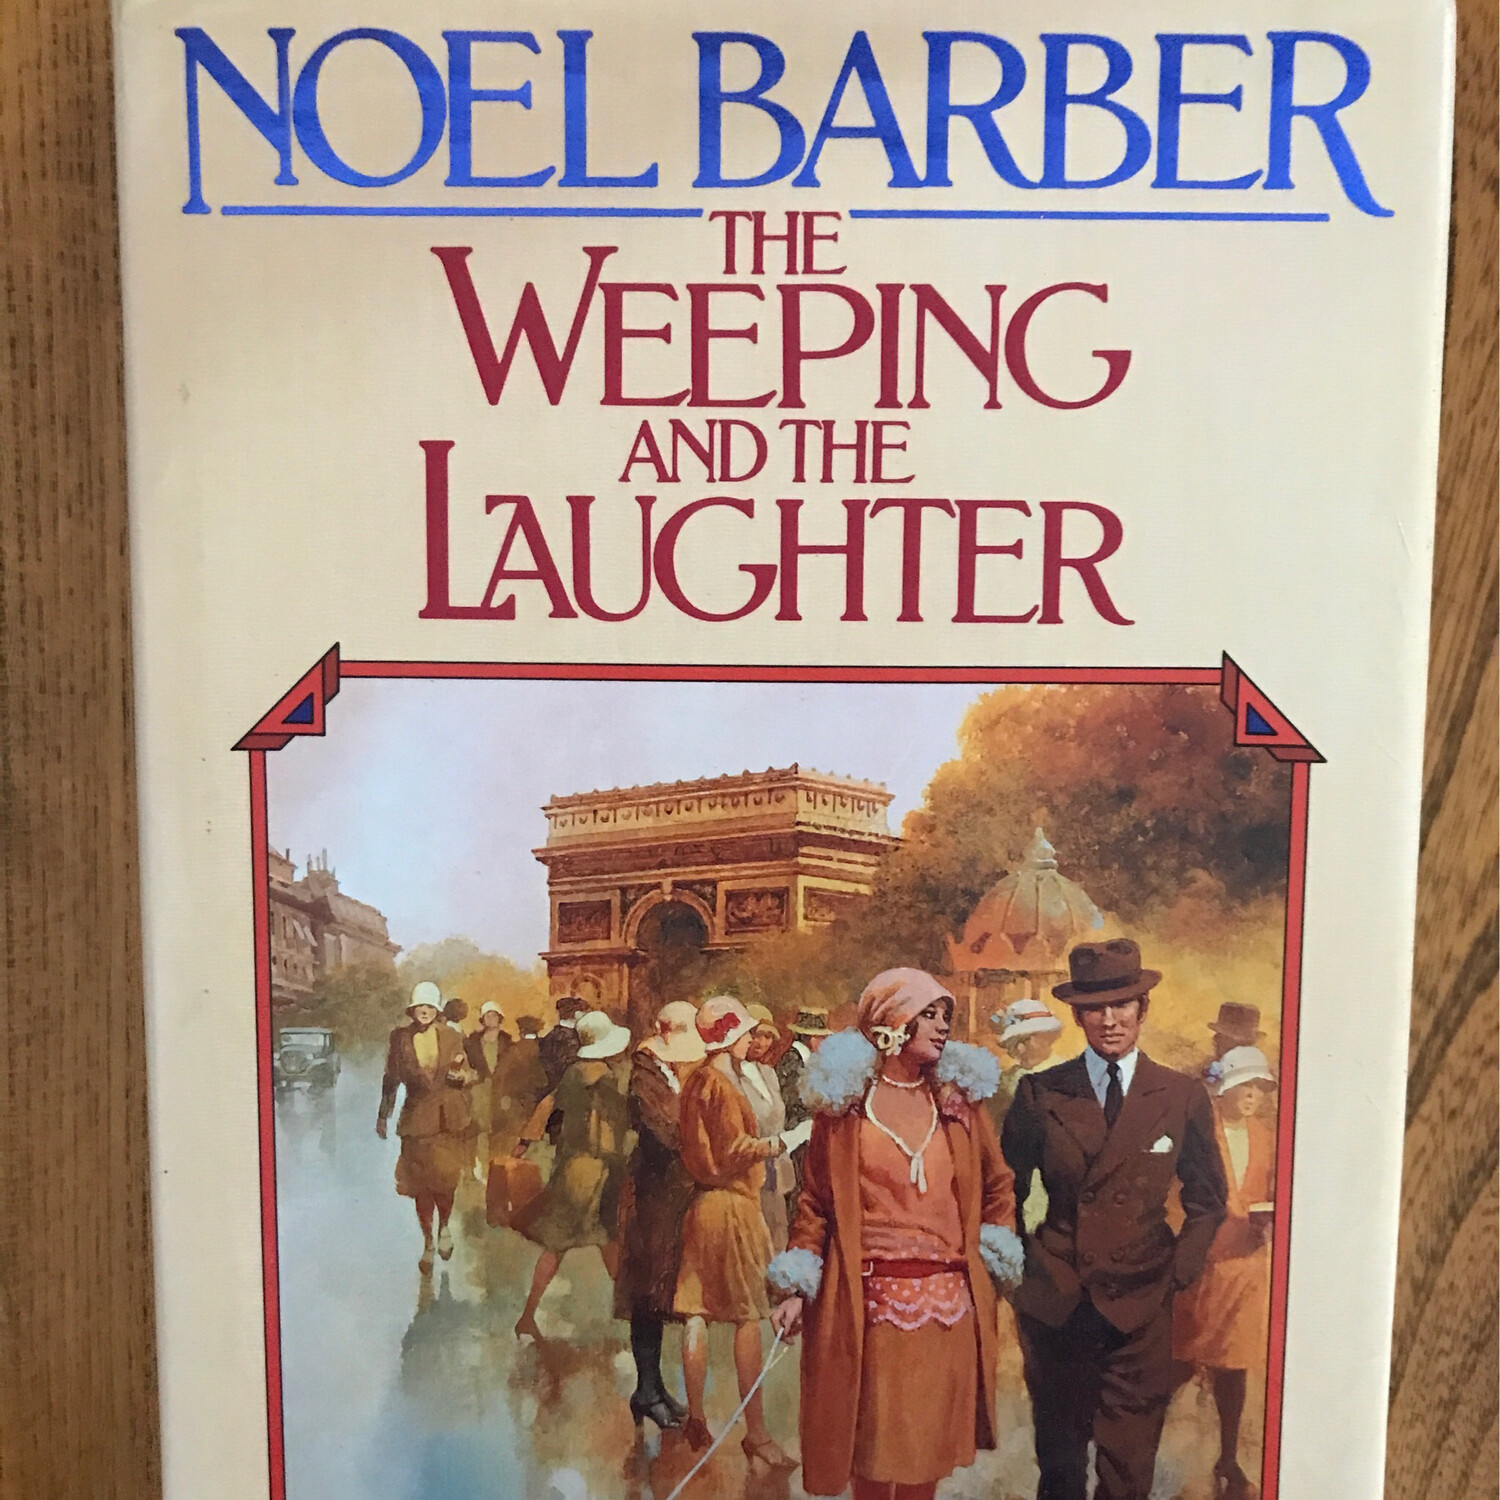 The Weeping And The Laughter, Noel Barber